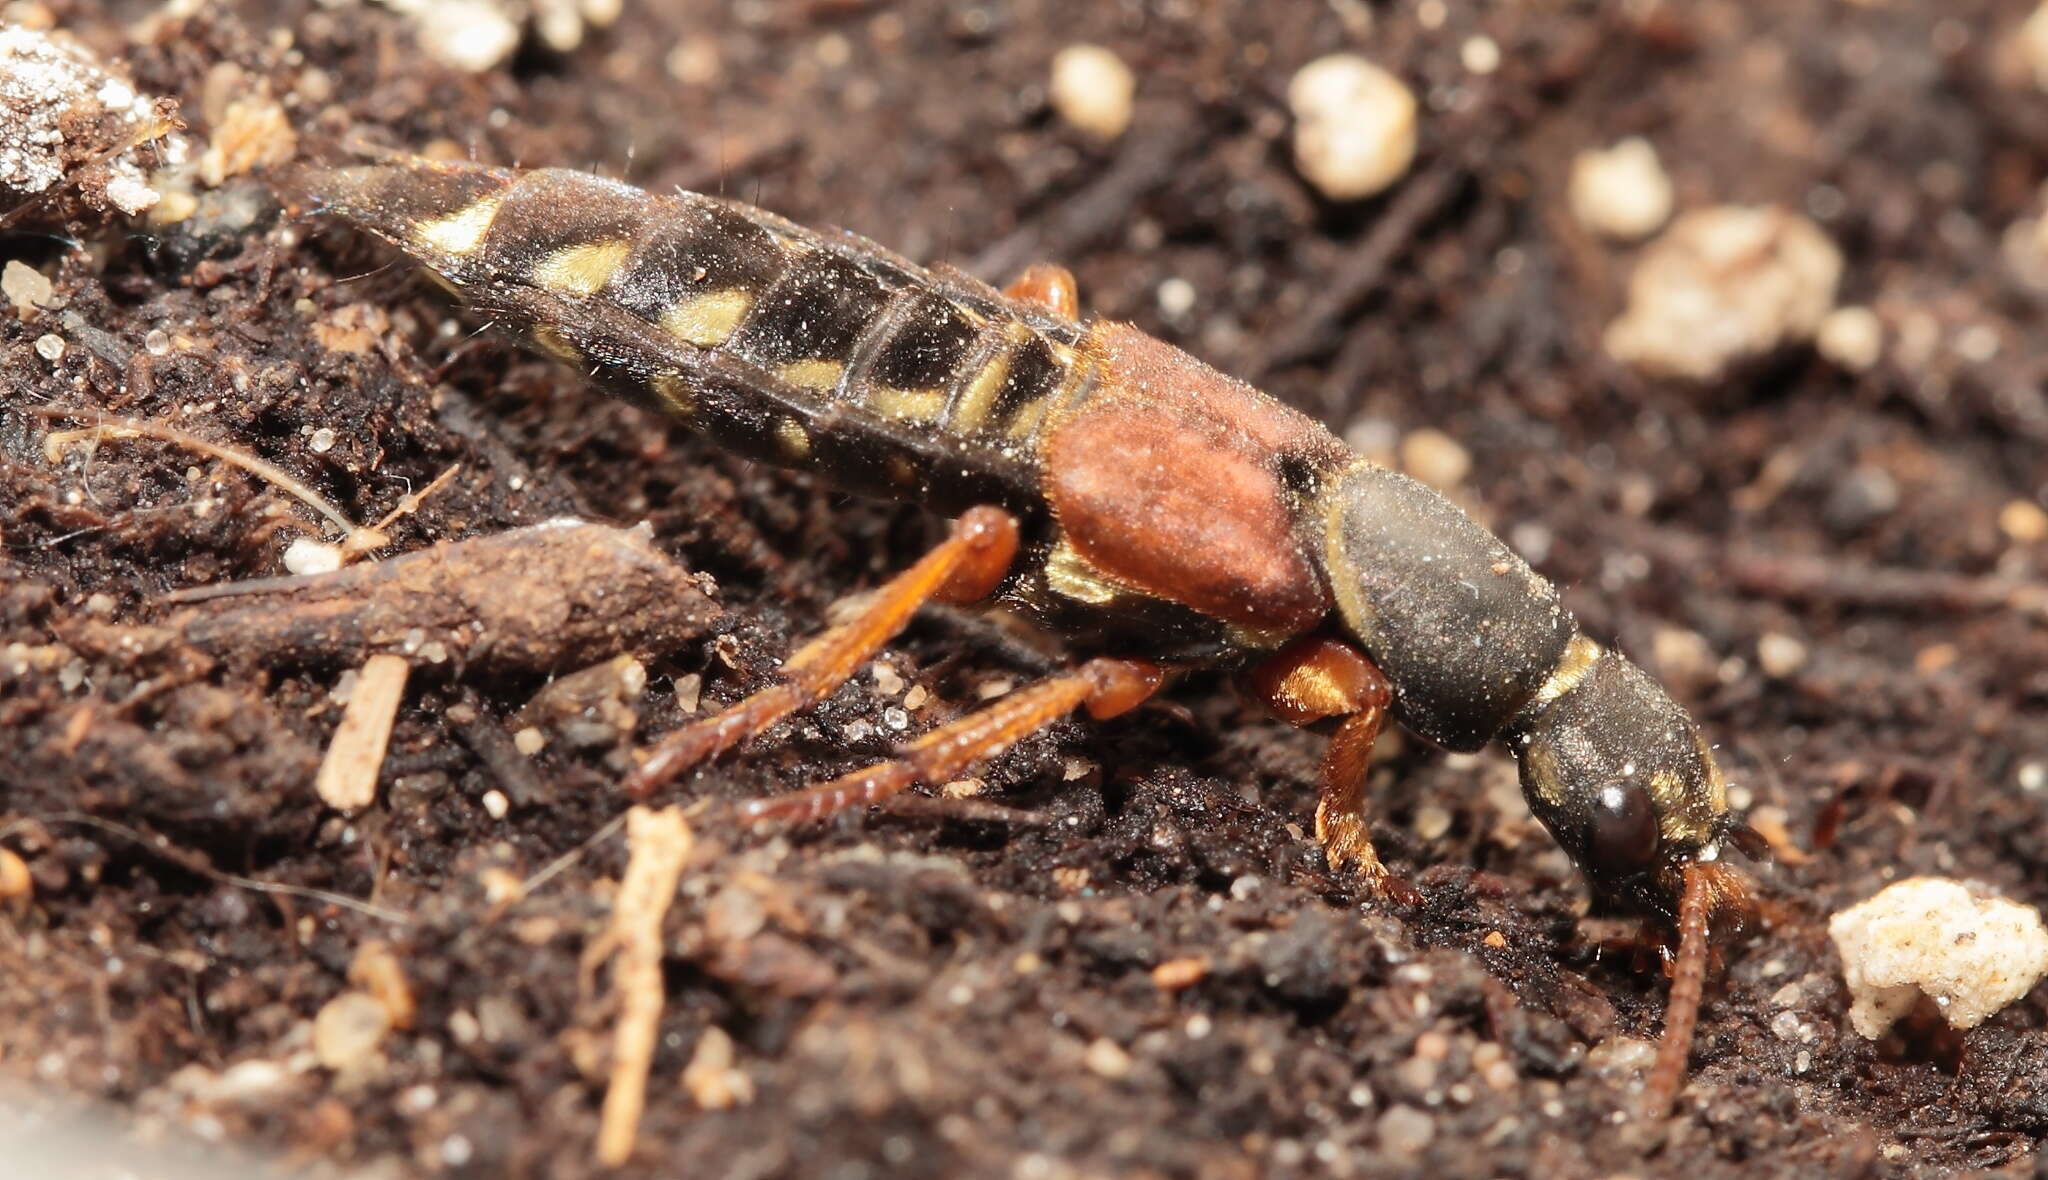 Image of Imperial rove beetle